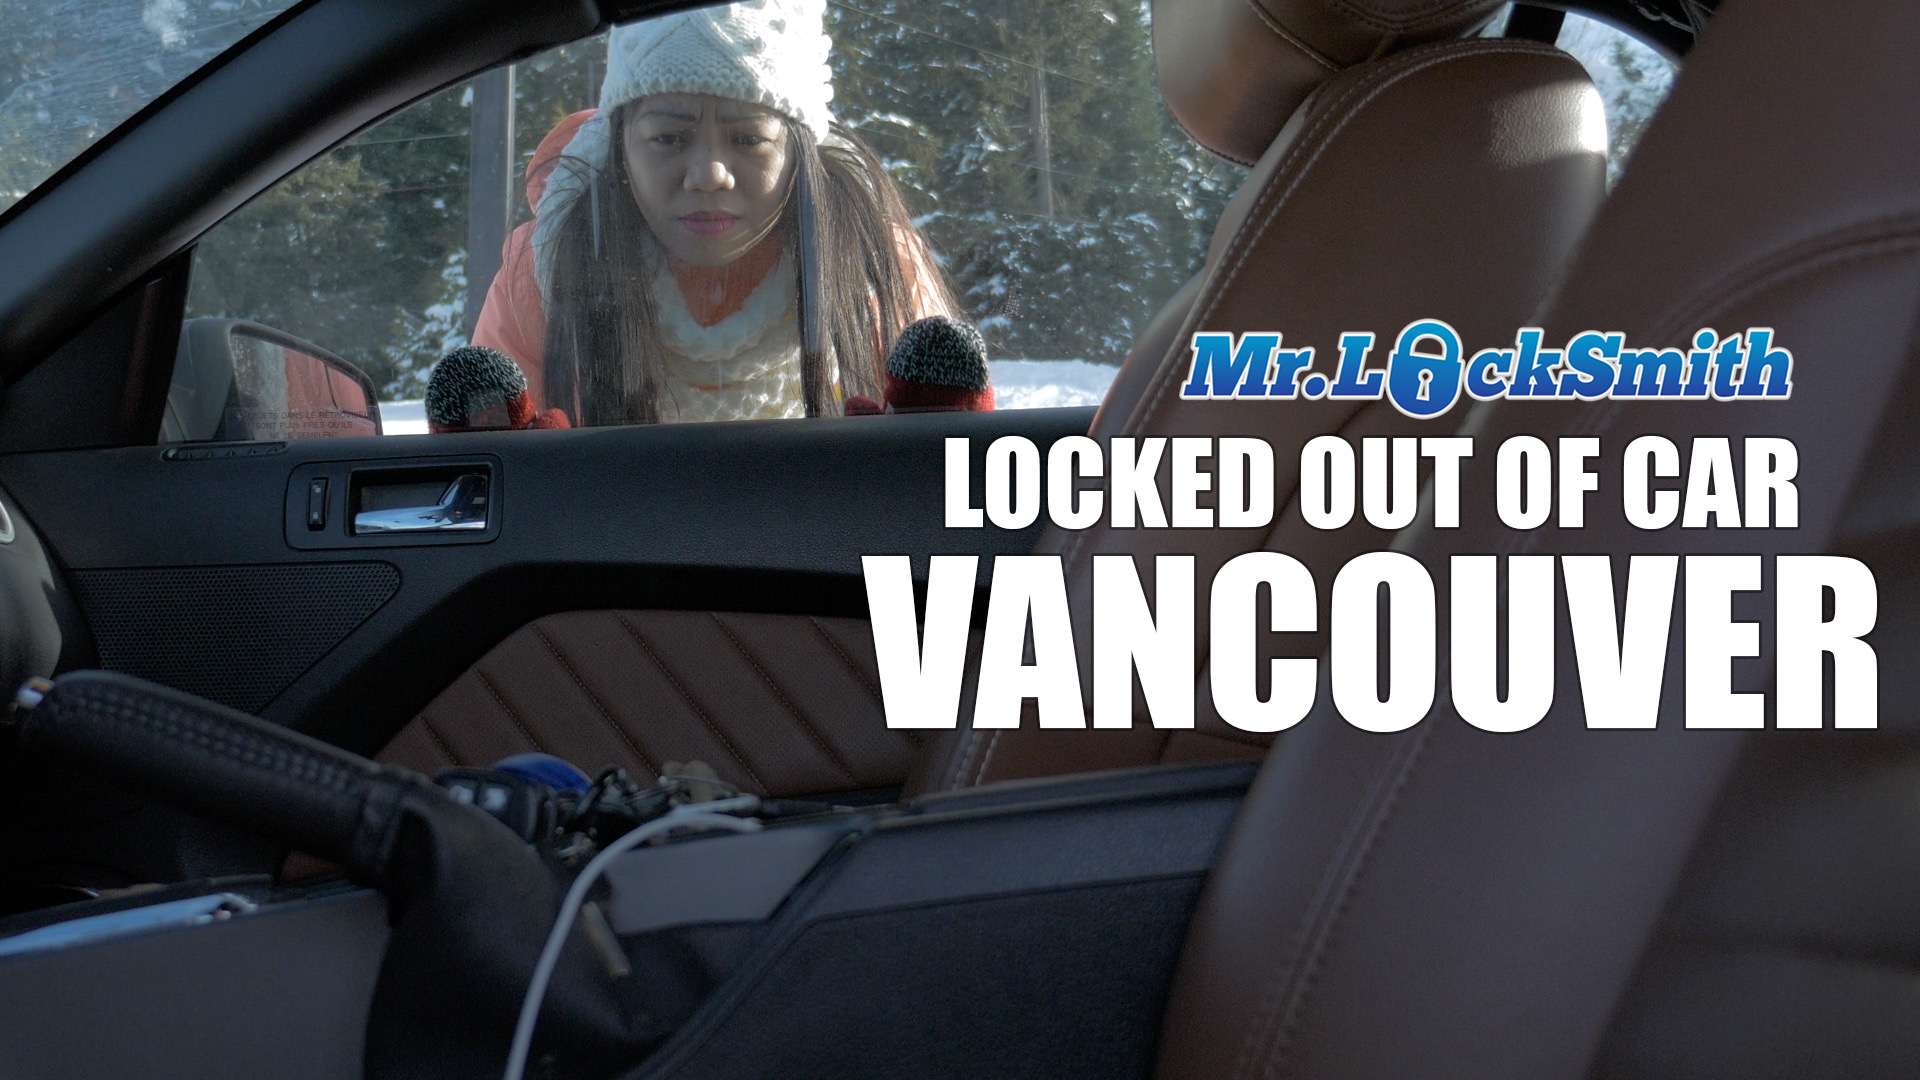 Locked out of car in Vancouver